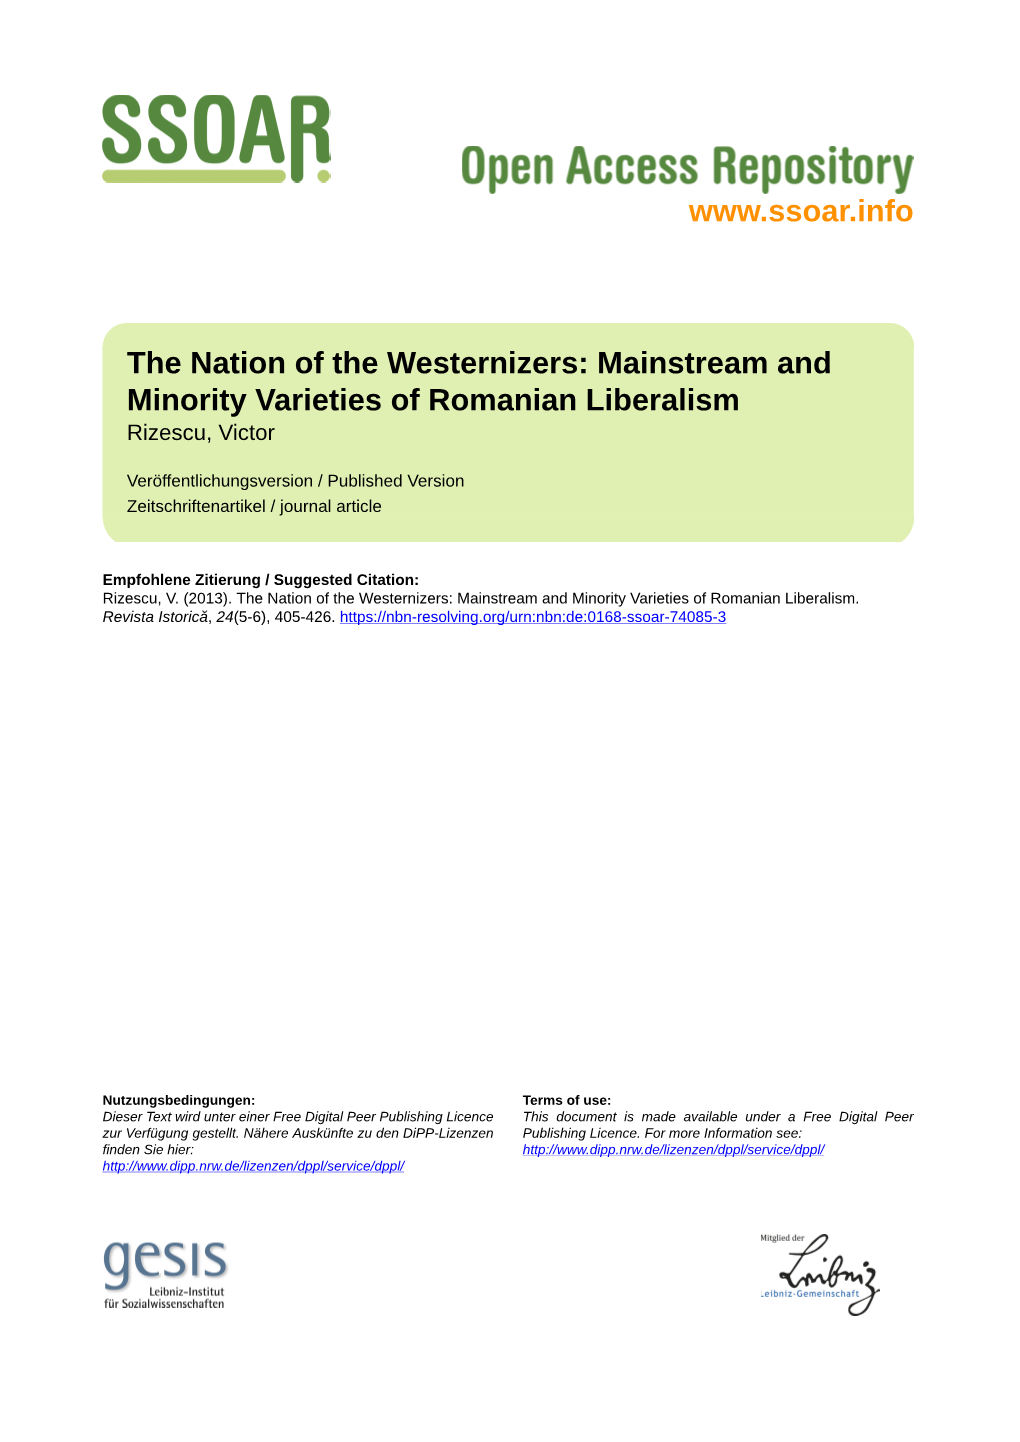 The Nation of the Westernizers: Mainstream and Minority Varieties of Romanian Liberalism Rizescu, Victor